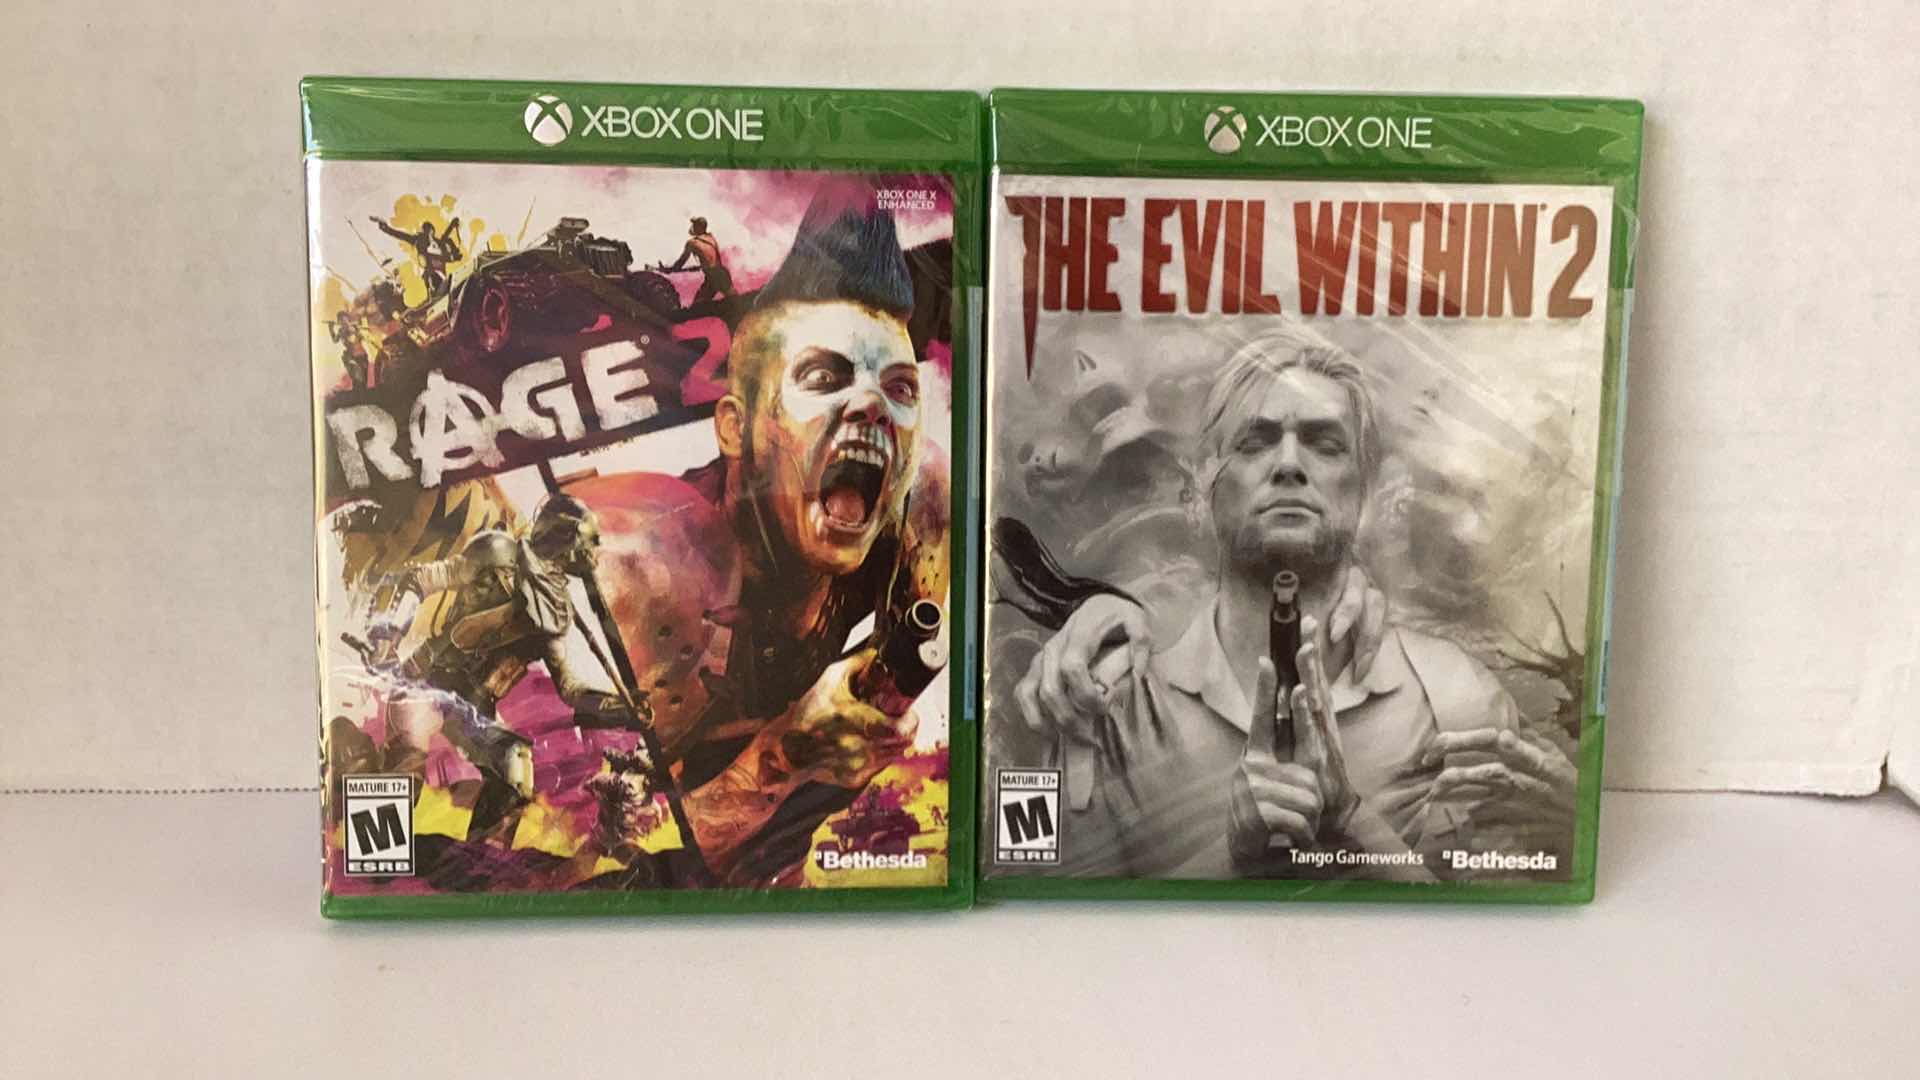 Photo 1 of 2 NEW X-BOX GAMES: RAGE 2 AND THE EVIL WITHIN 2